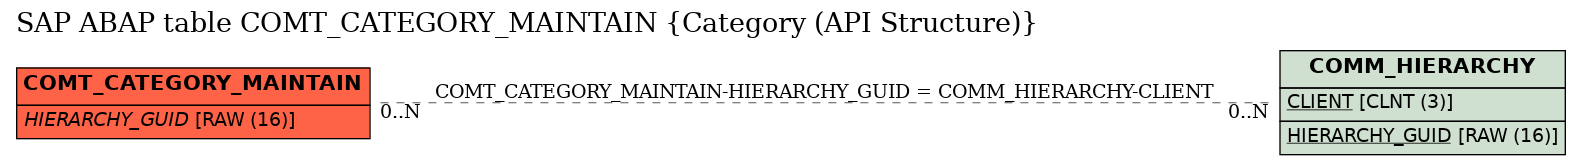 E-R Diagram for table COMT_CATEGORY_MAINTAIN (Category (API Structure))